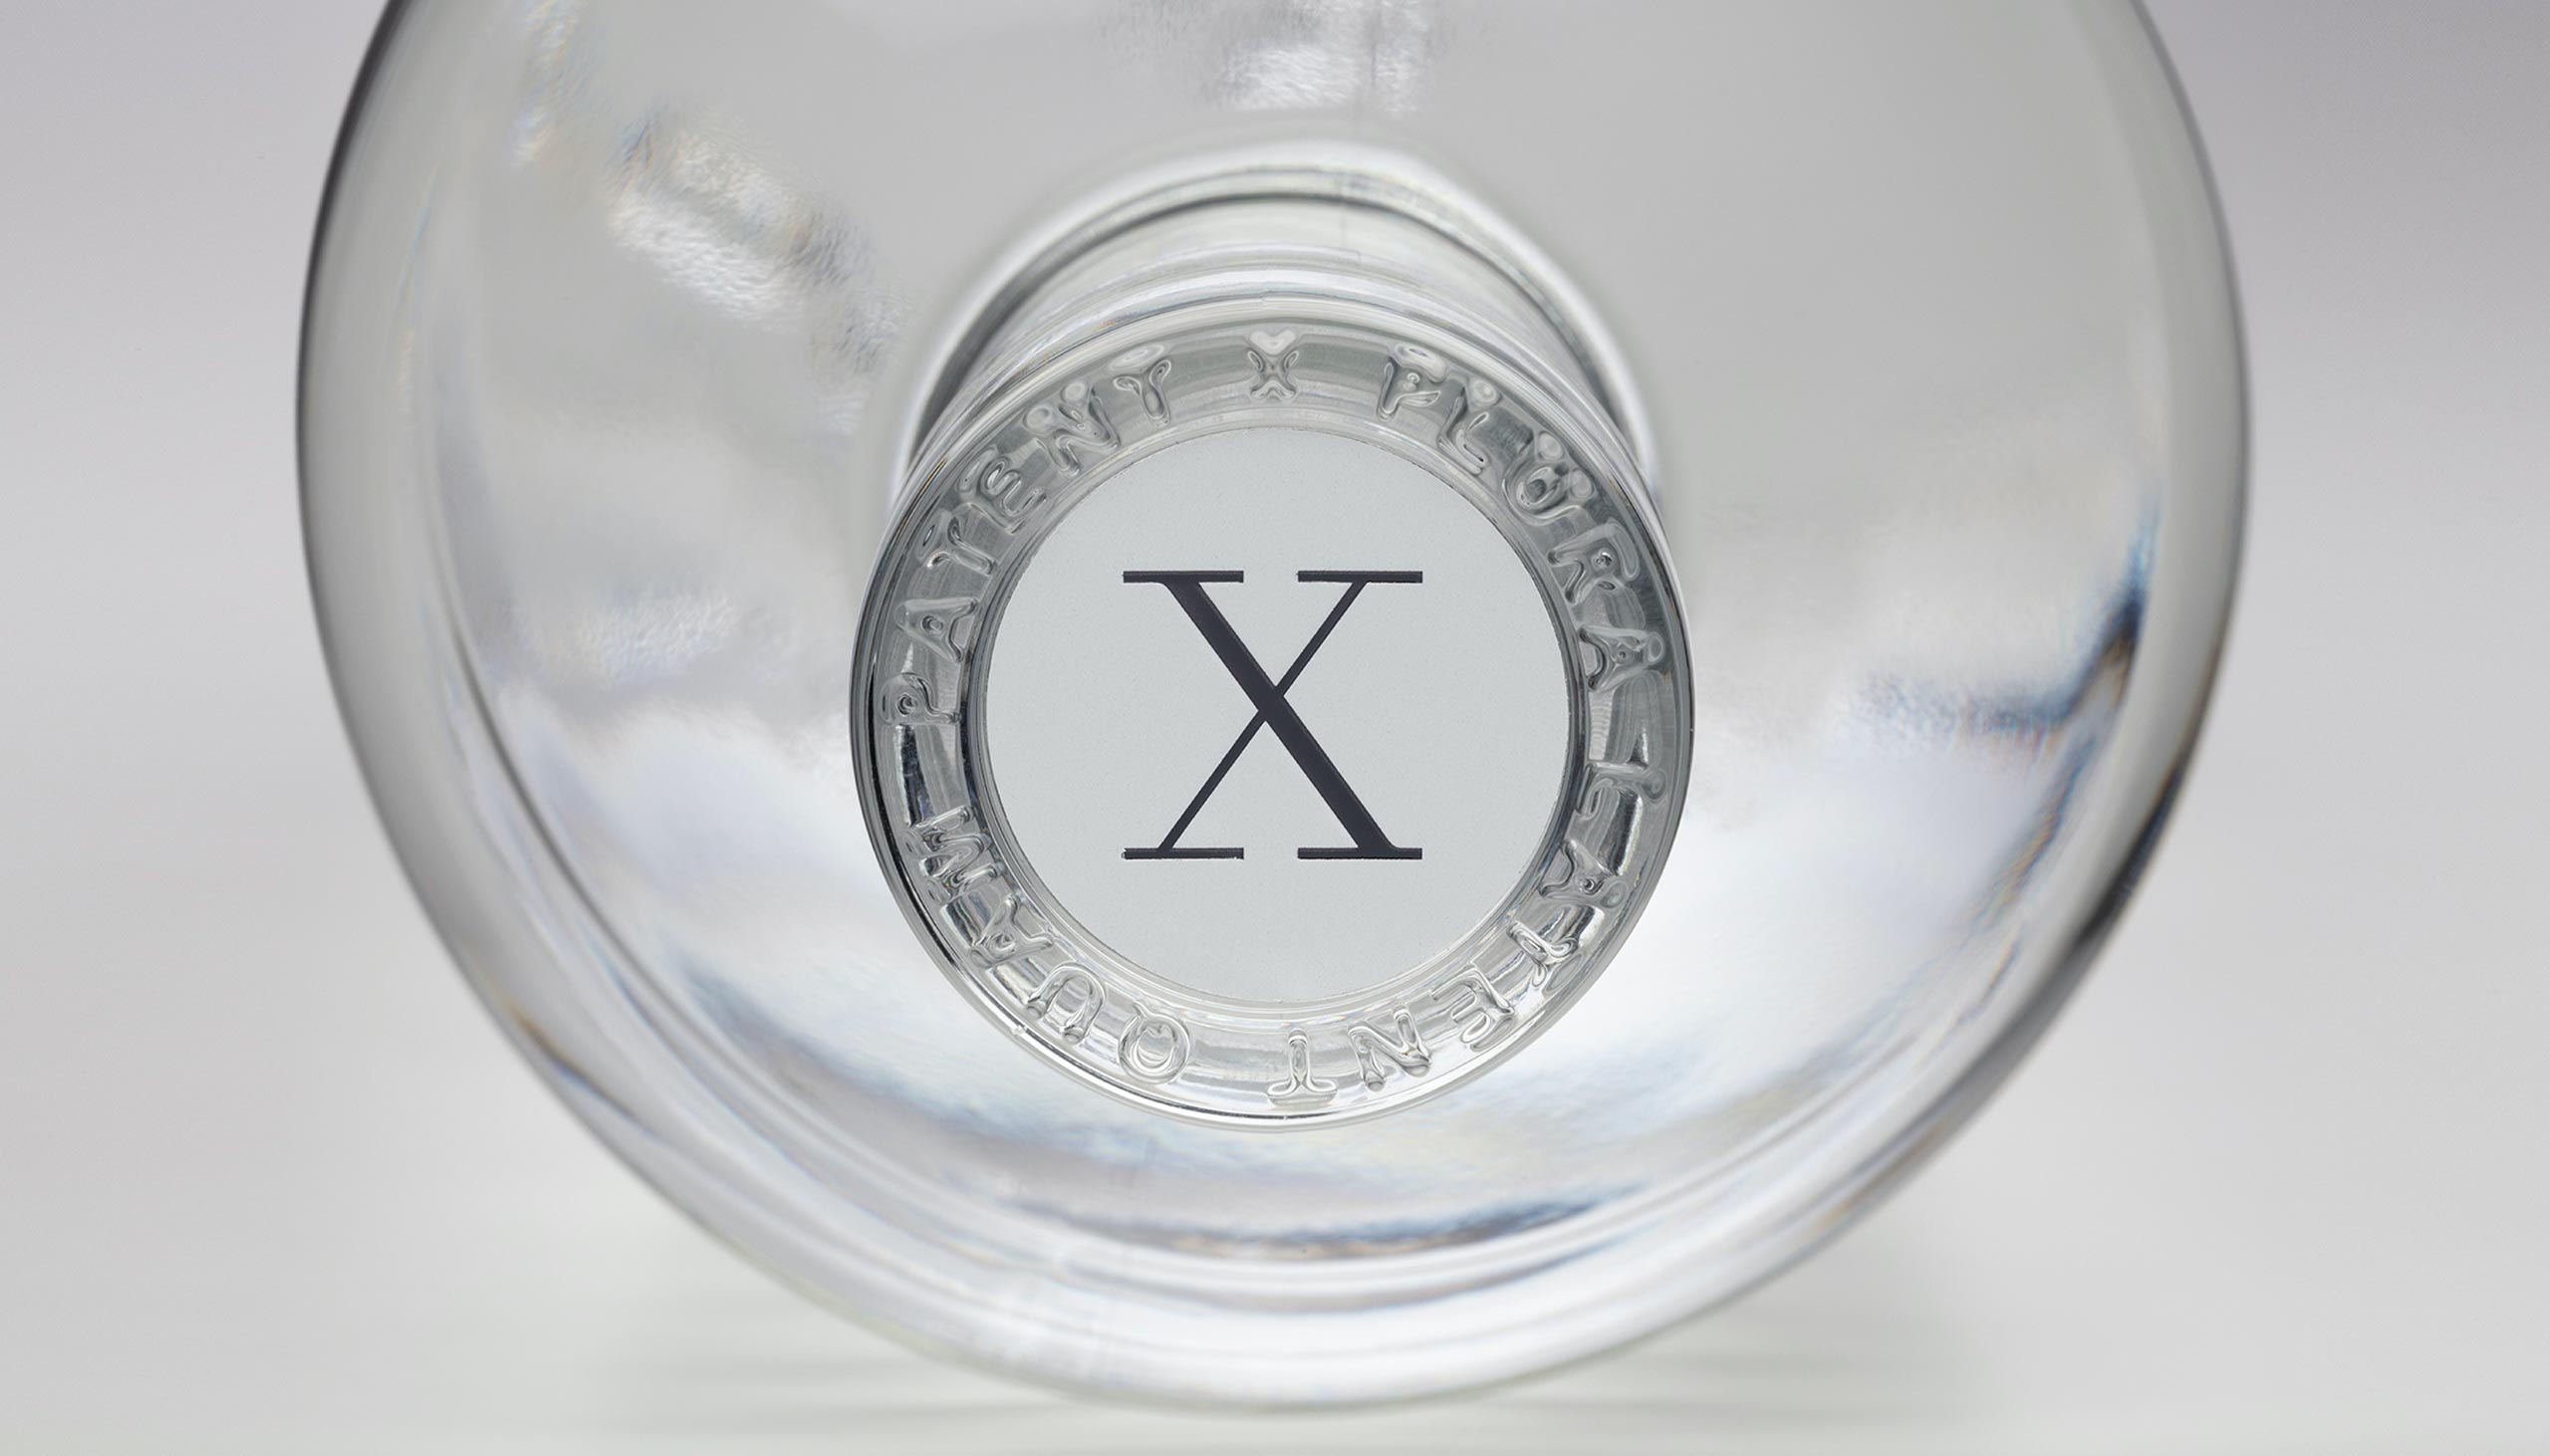 'X' bottle cap on the top of our bottles